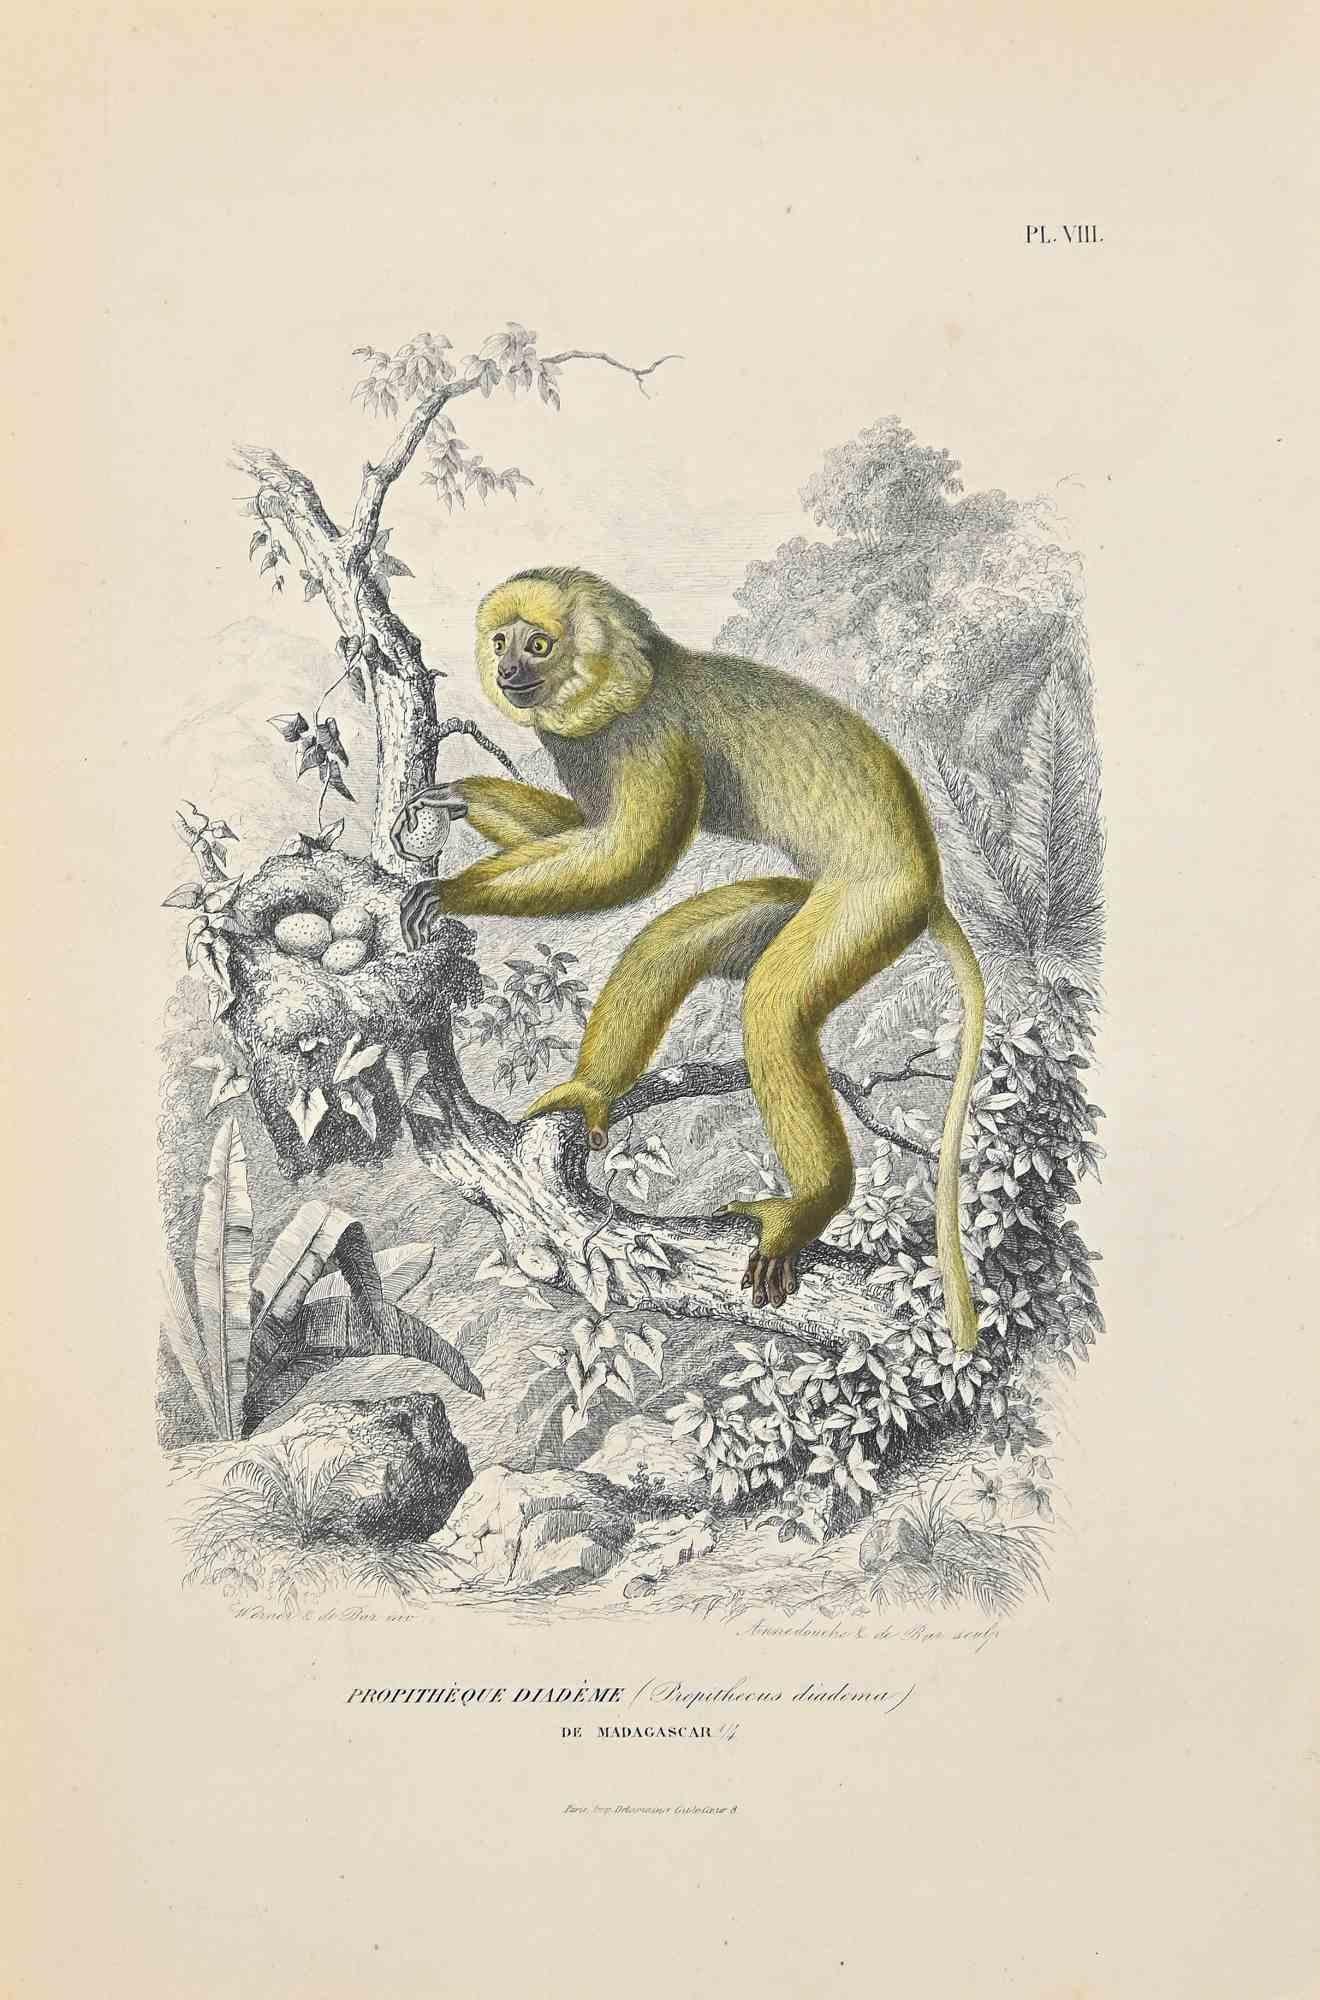 Diademed Sifaka - Original Lithograph by Paul Gervais - 1854